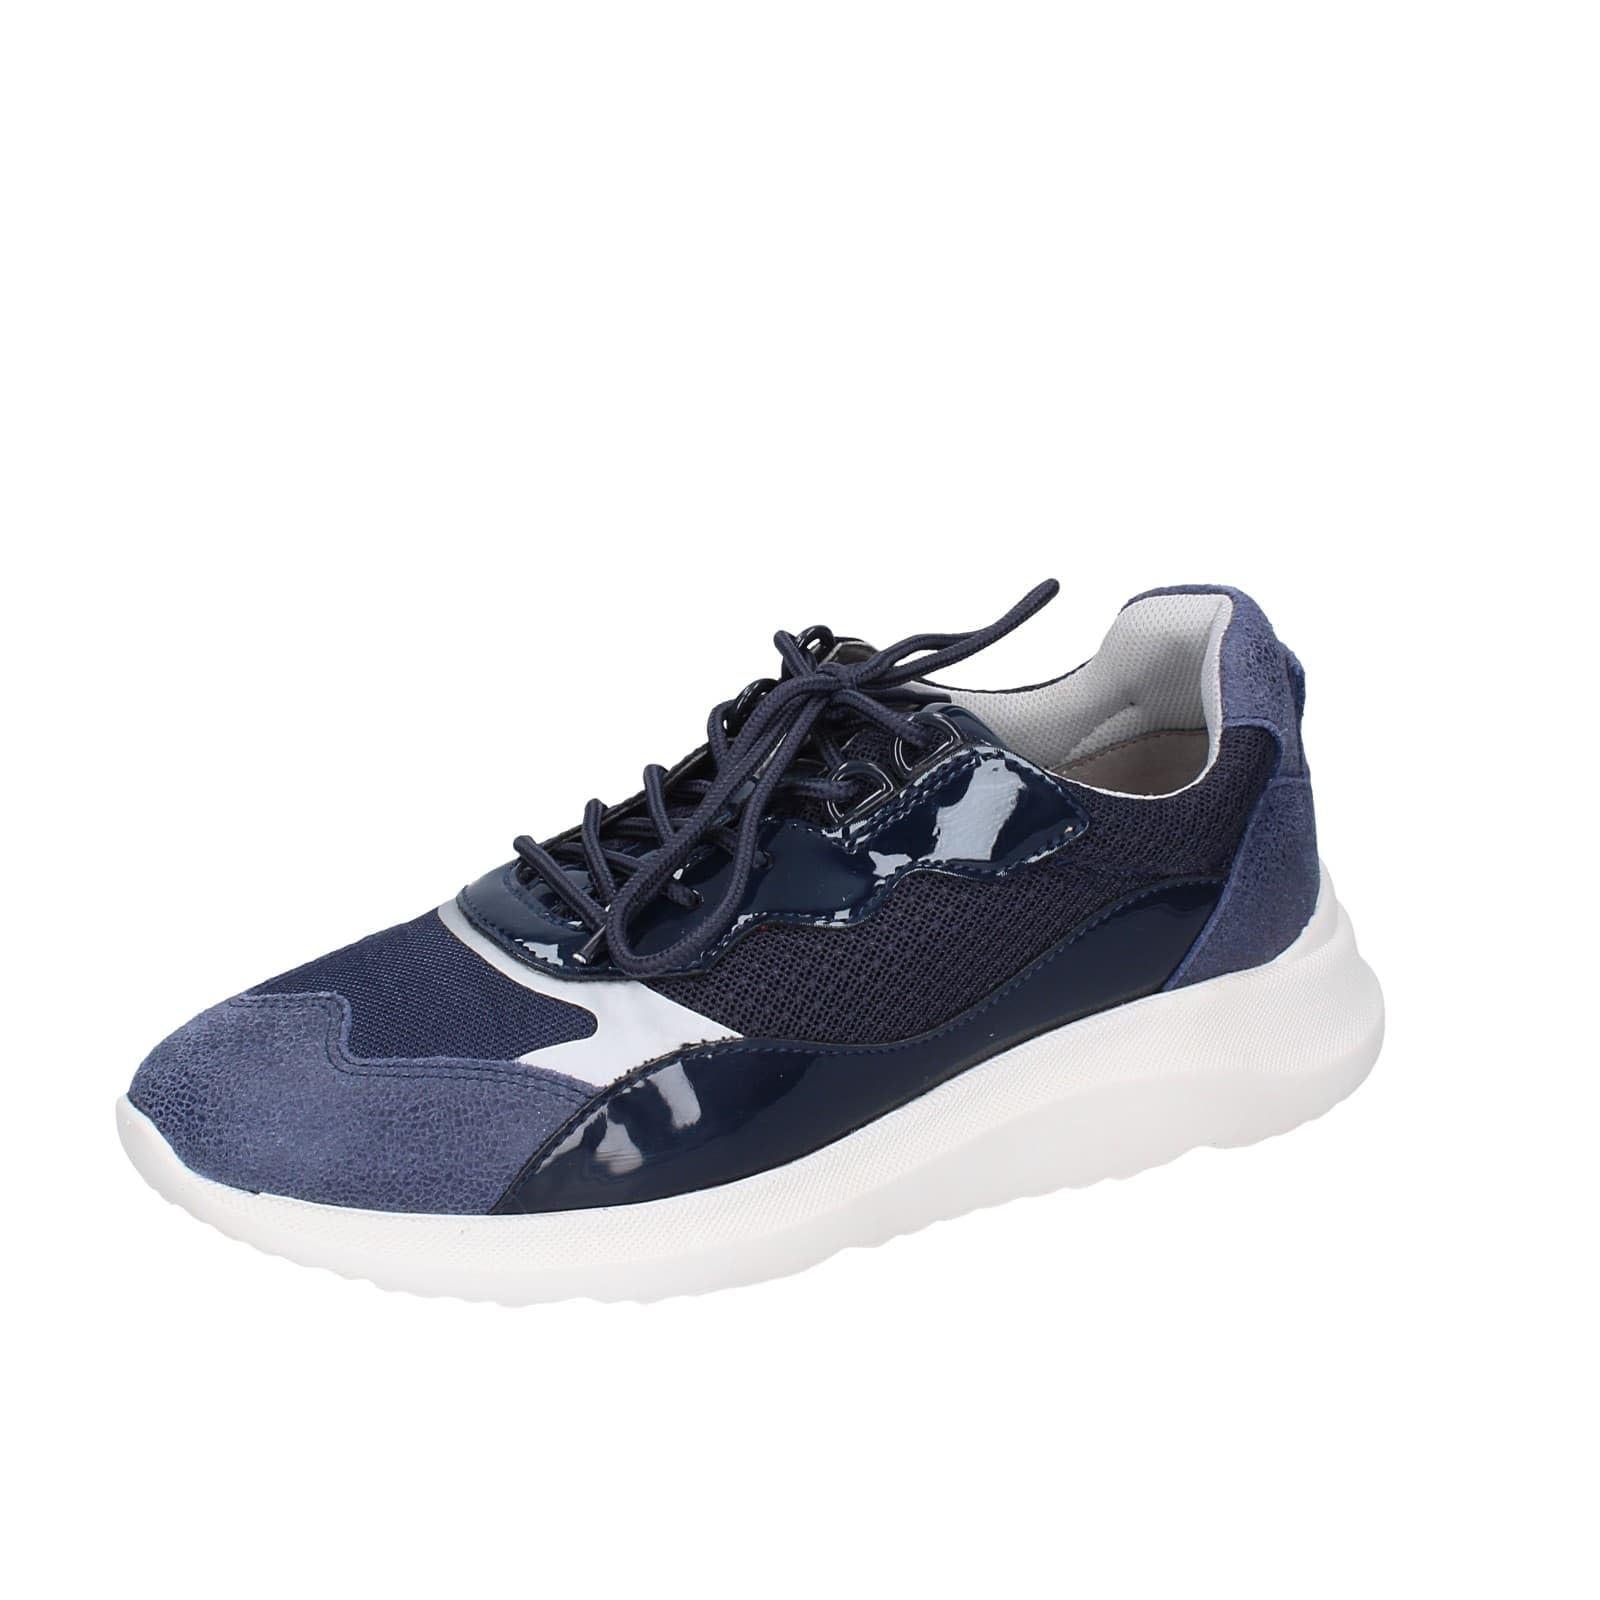 Geox Patent Leather Blue Fashion-sneakers 5 Uk | Lyst UK